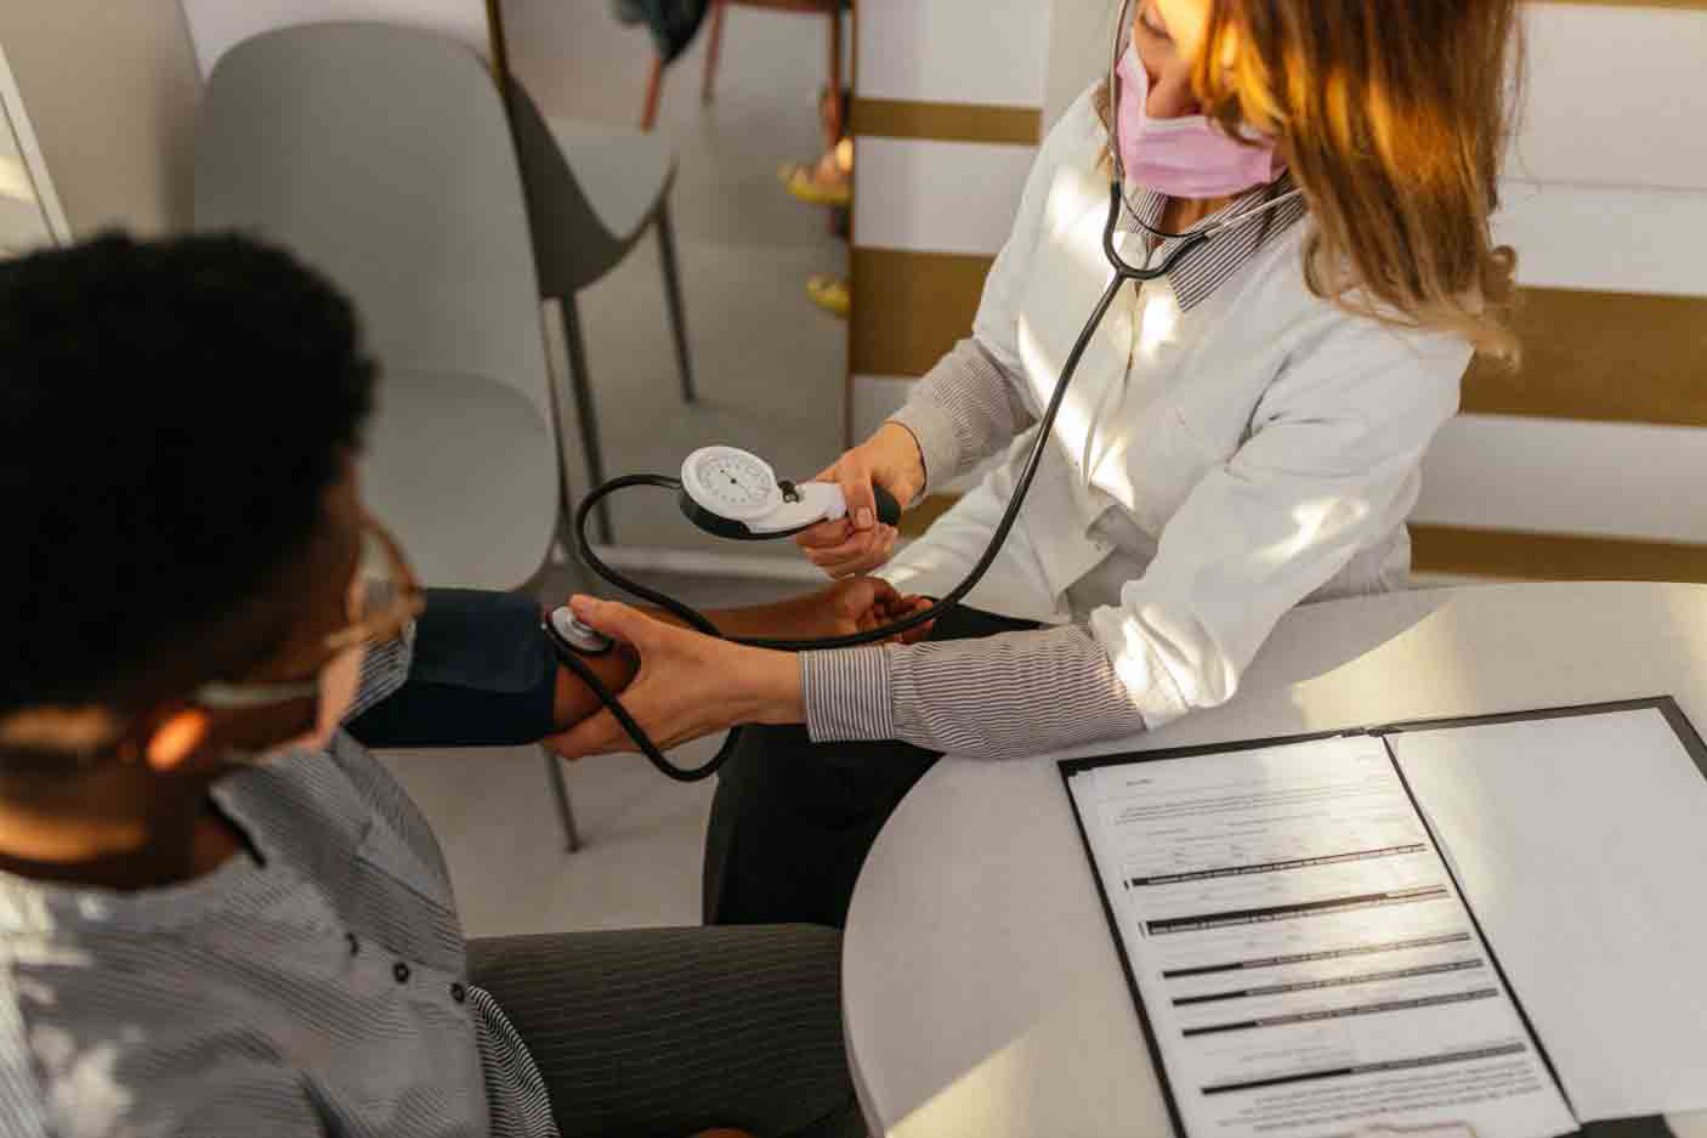 A doctor checking the blood pressure of a patient